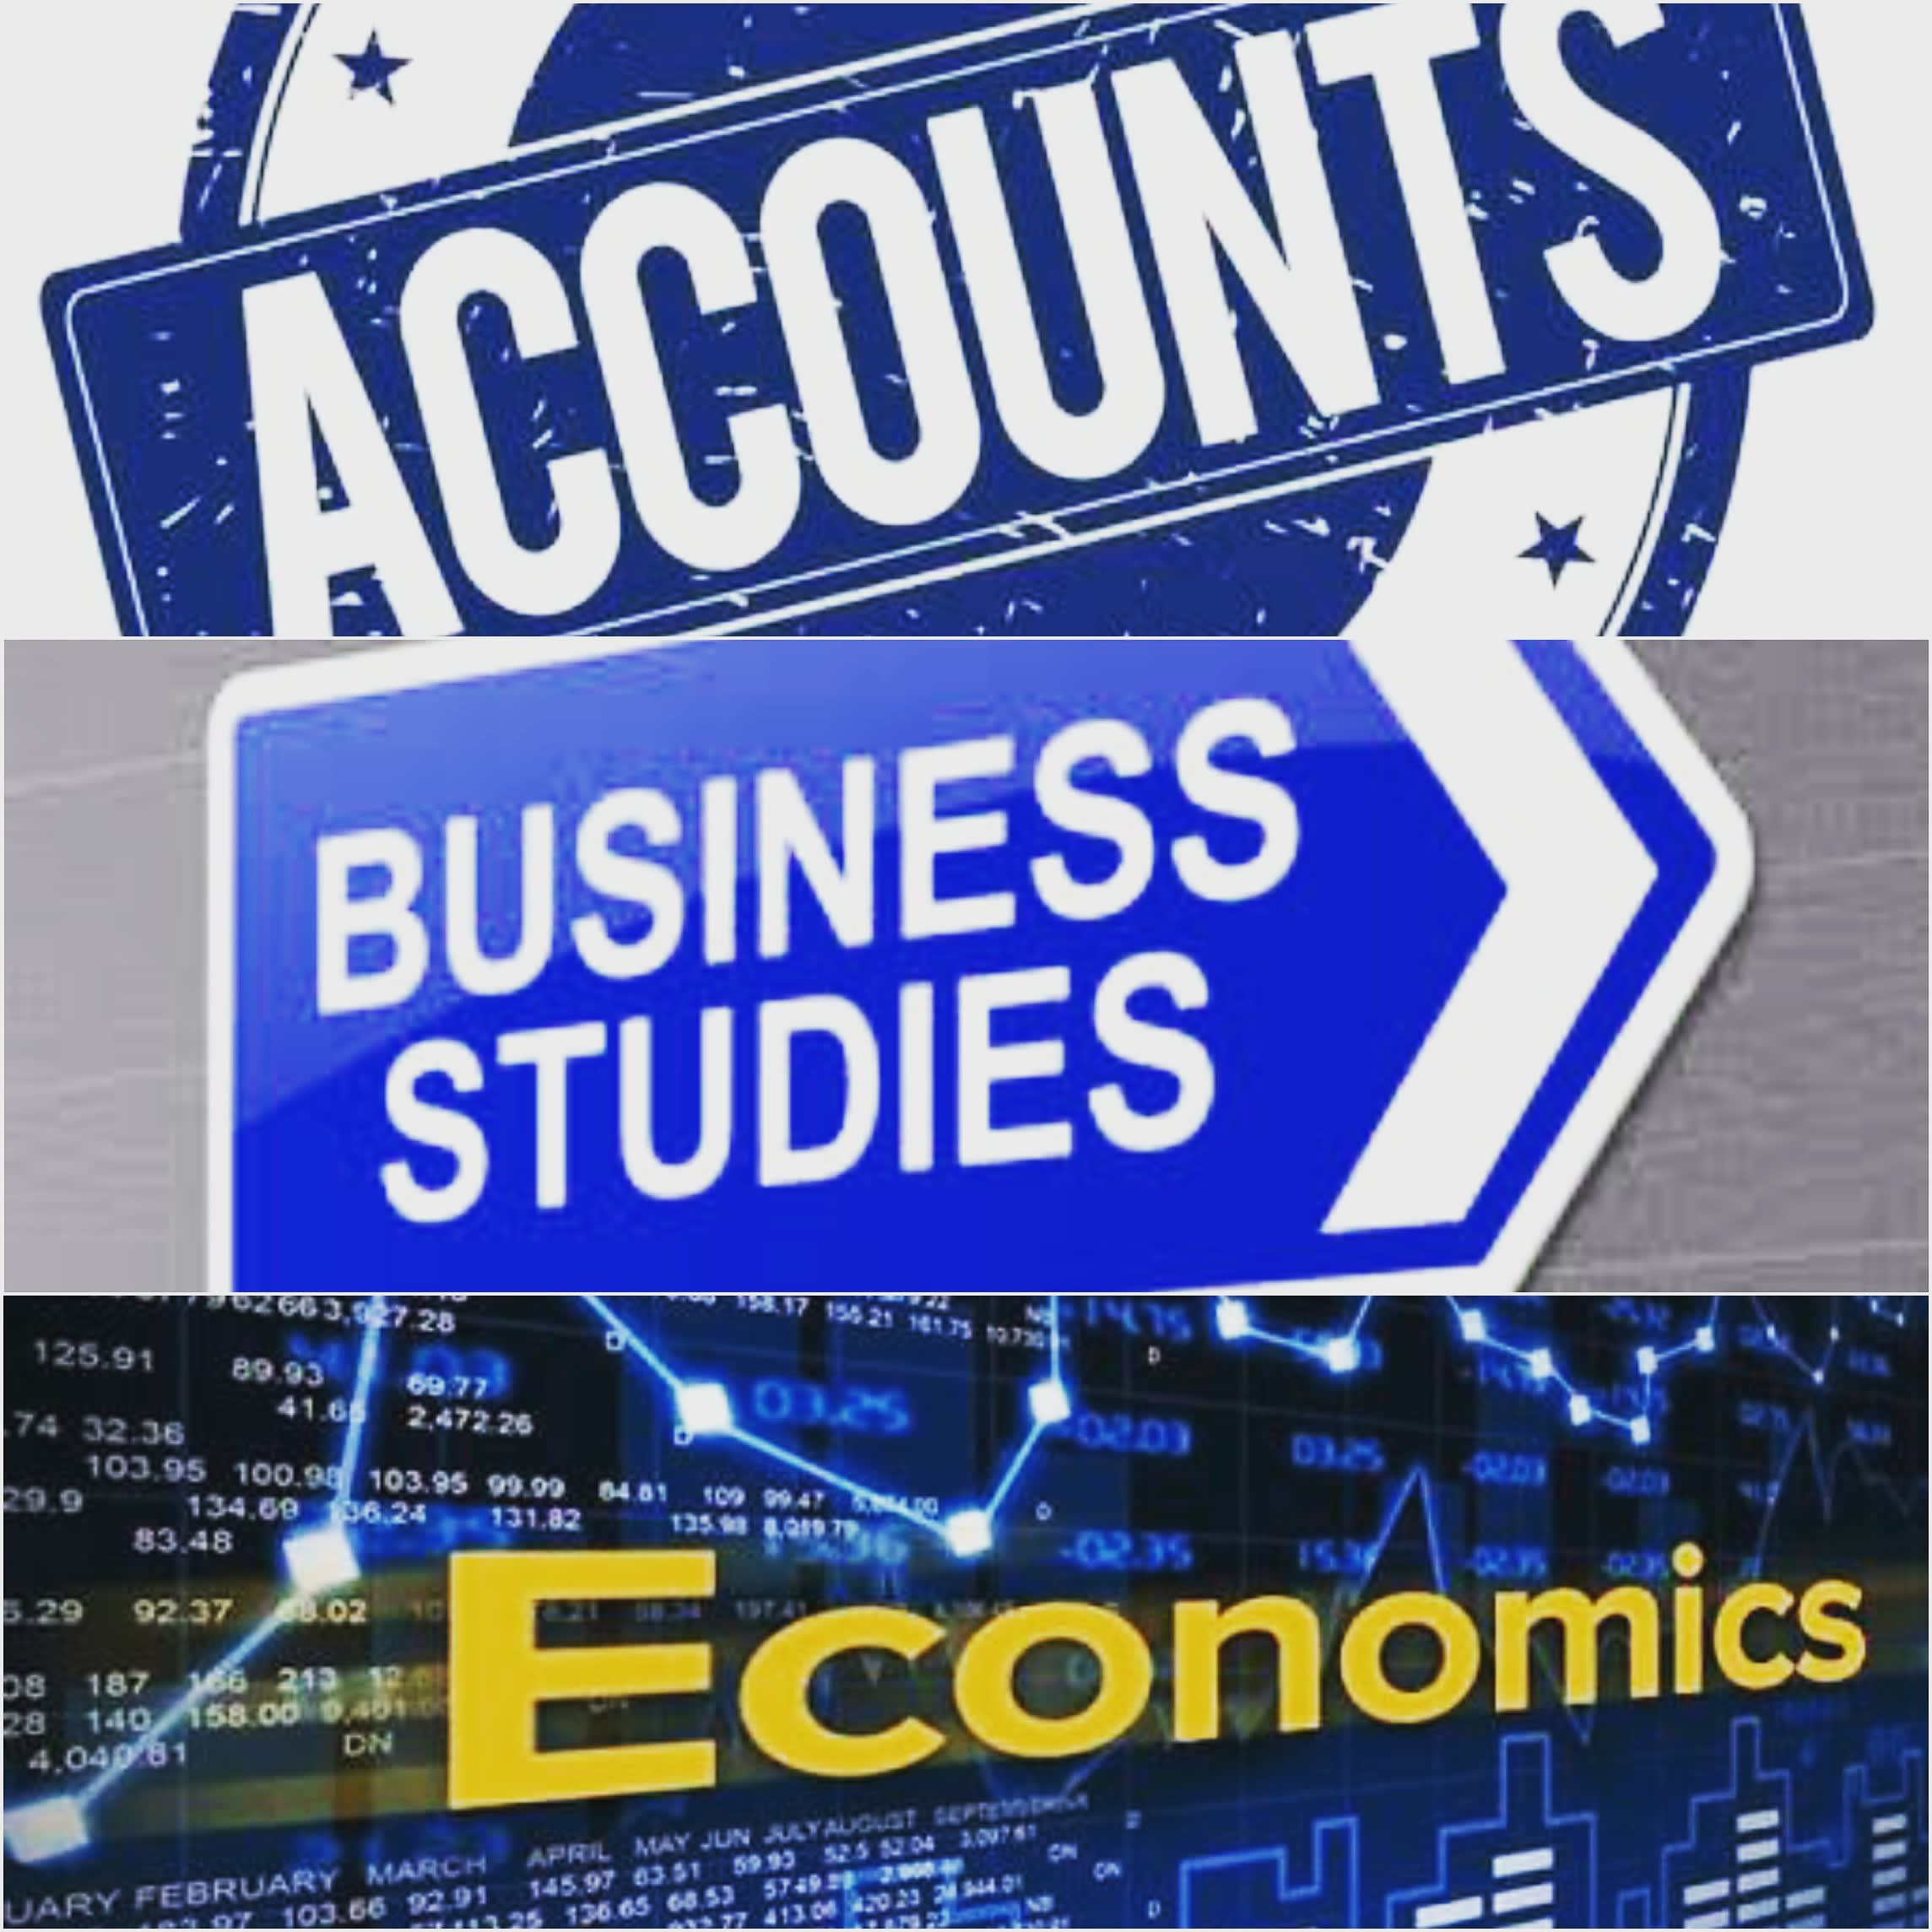 Diploma of Business Studies - Course Seeker